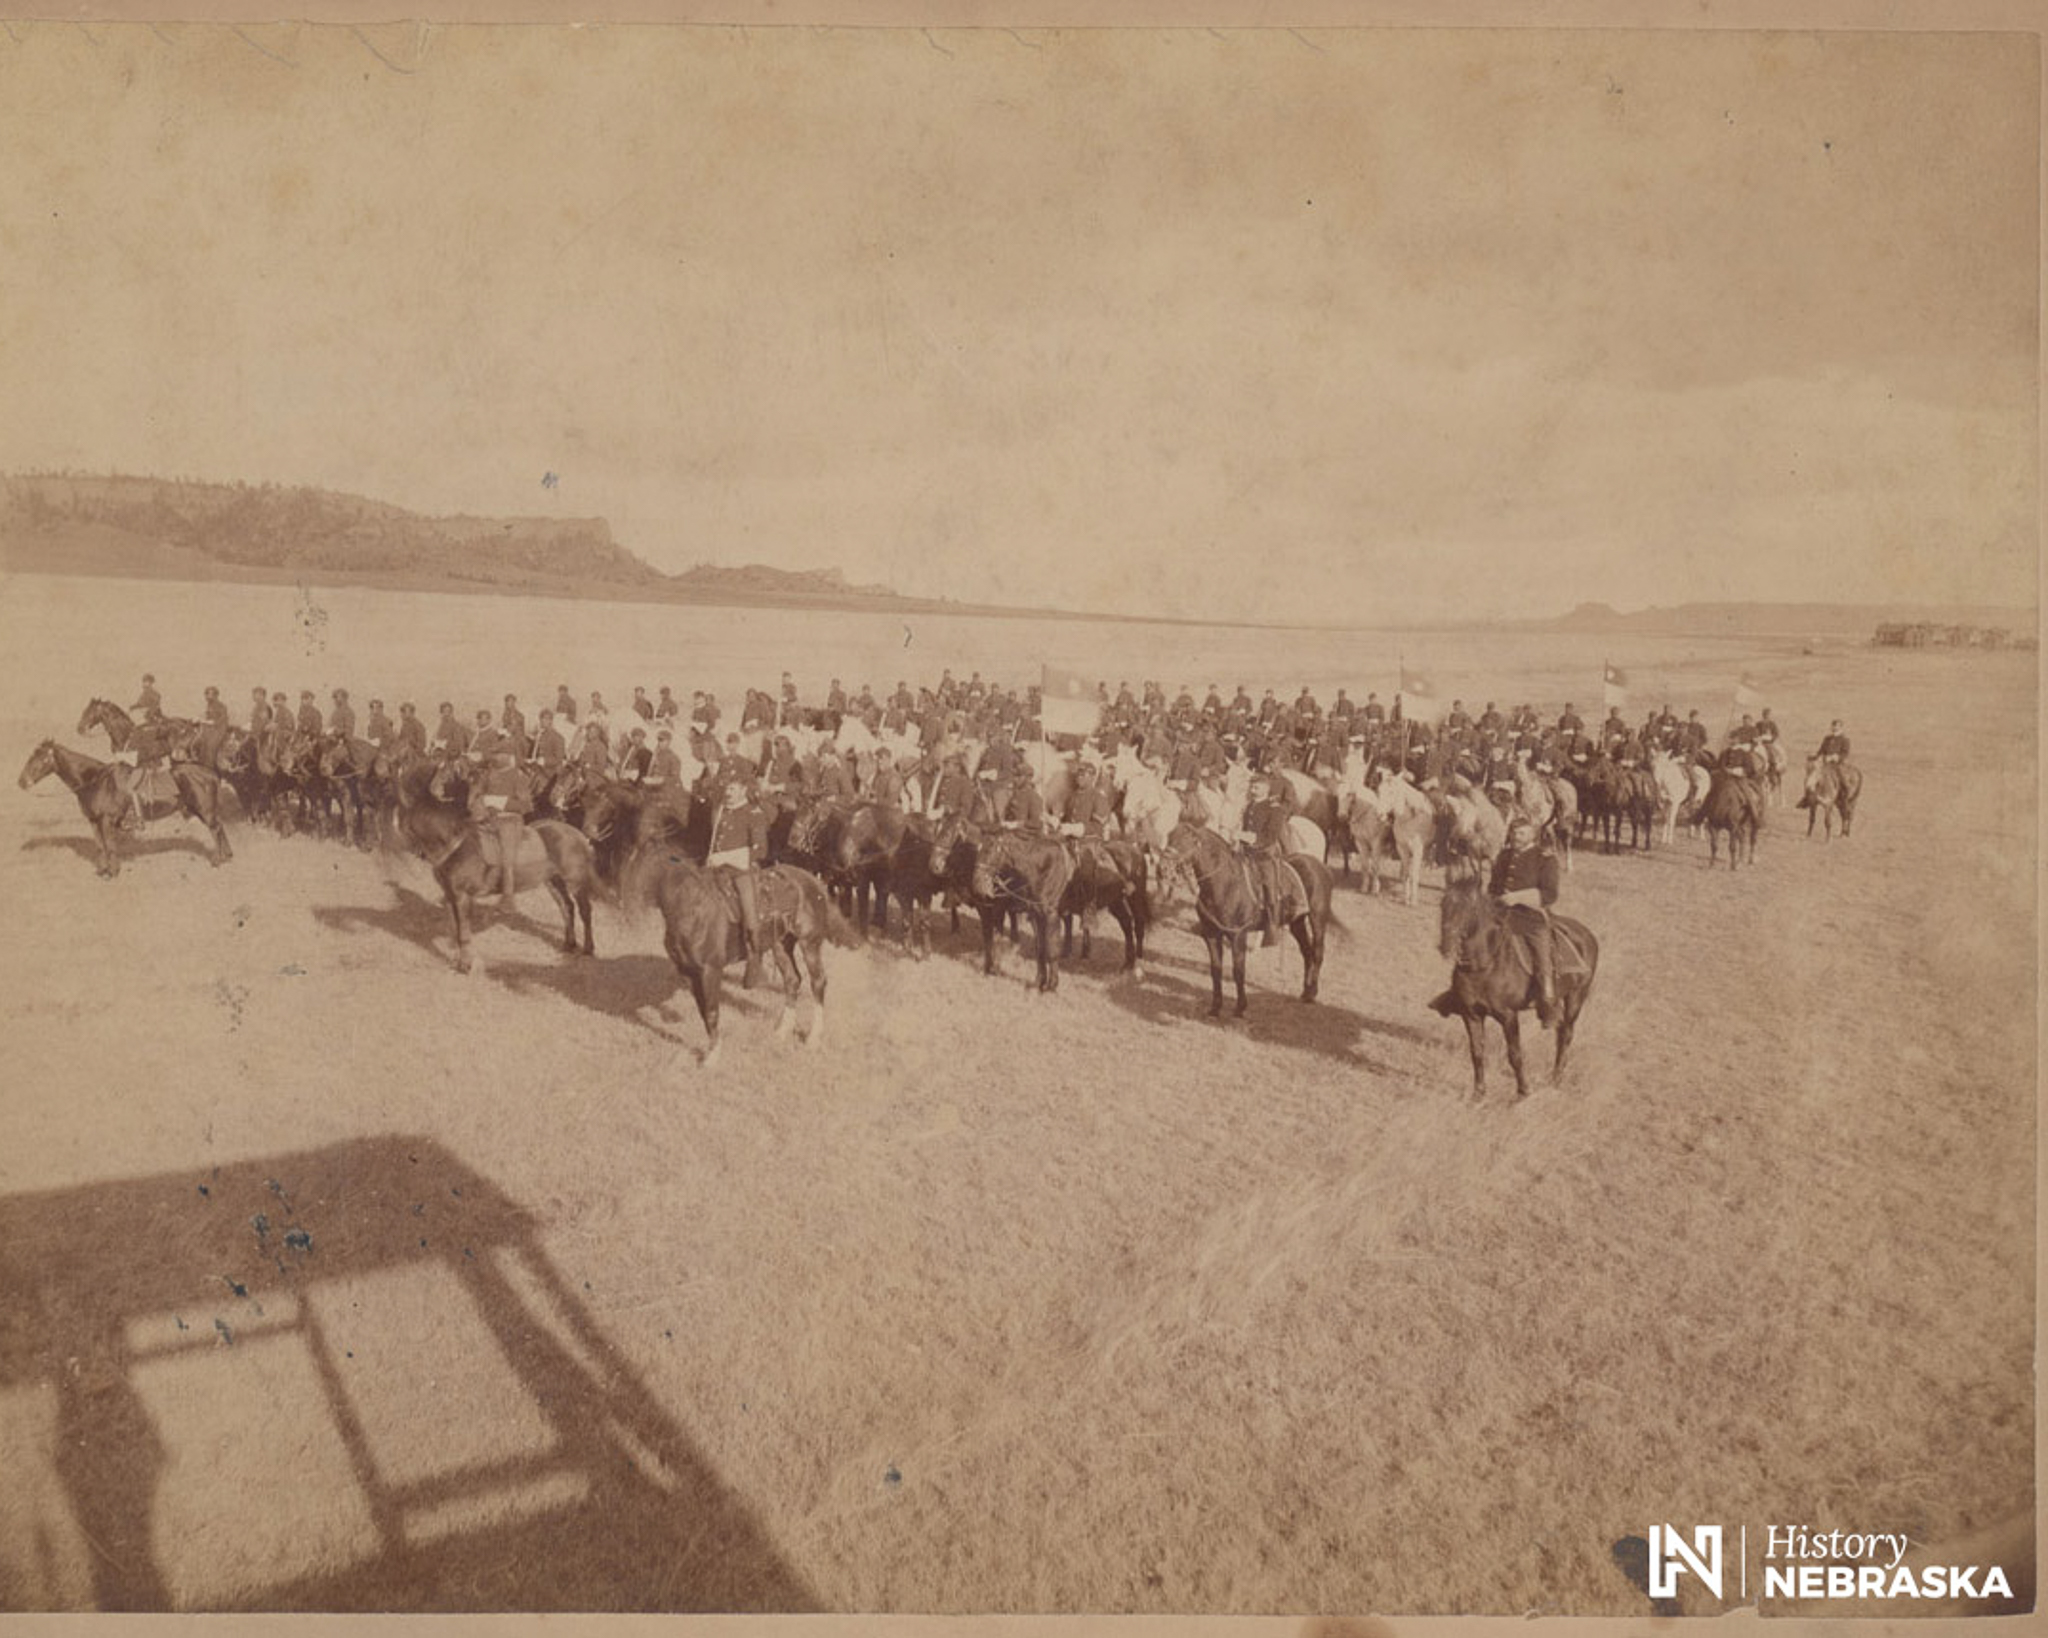 Ninth Cavalry Regiment at Fort Robinson.